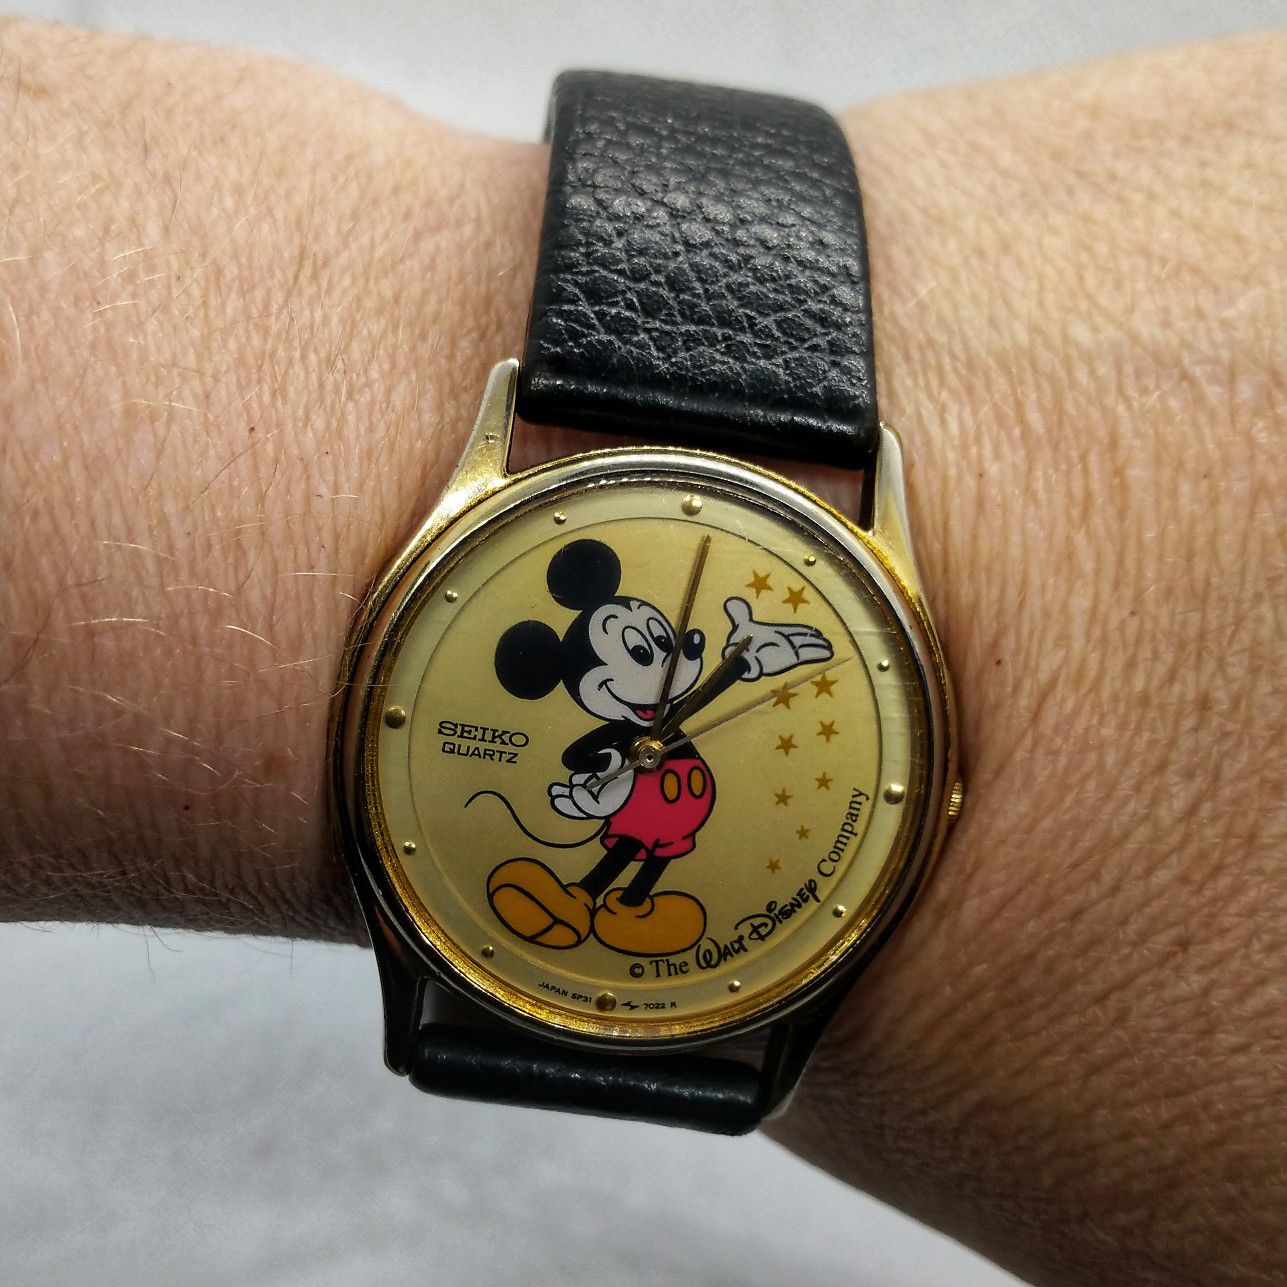 Vintage Seiko Quartz Mickey Mouse Watch 5P31-7009 RD for Sale in Everett,  WA - OfferUp